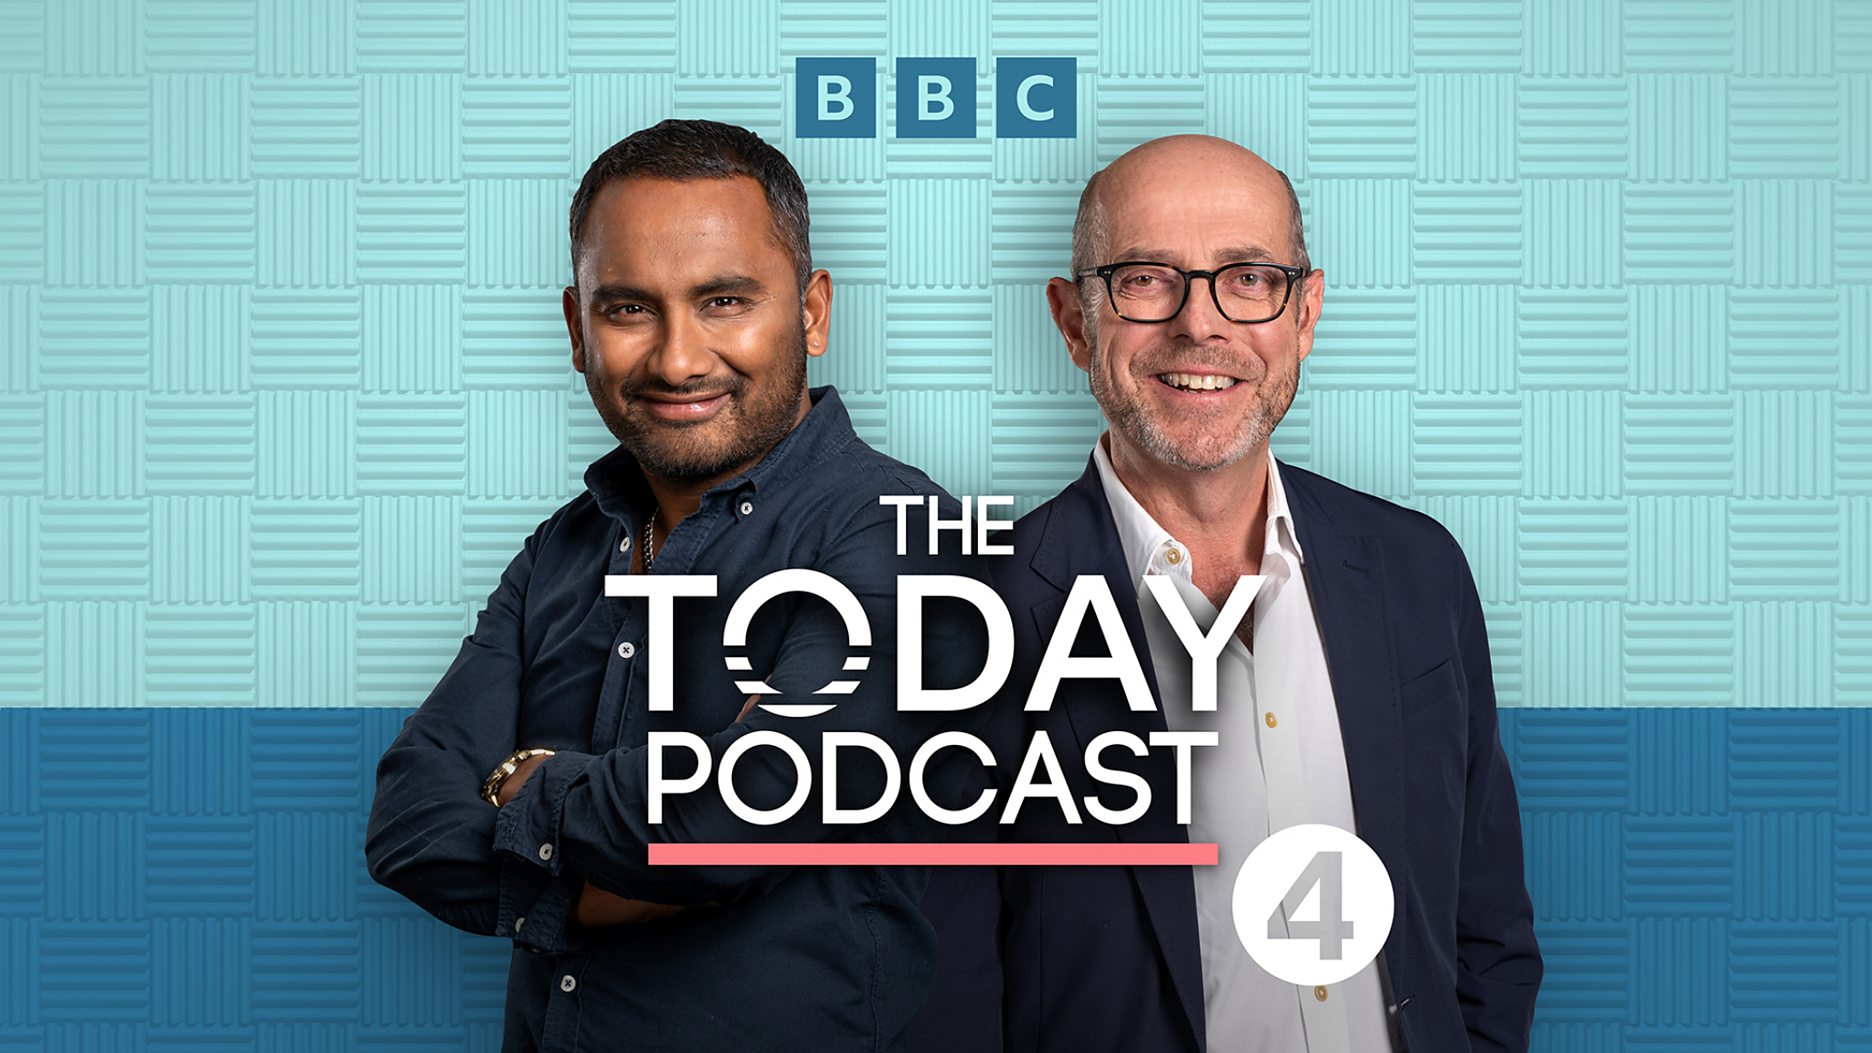 BBC Radio 4’s Today launches weekly podcast hosted by Amol Rajan and Nick Robinson